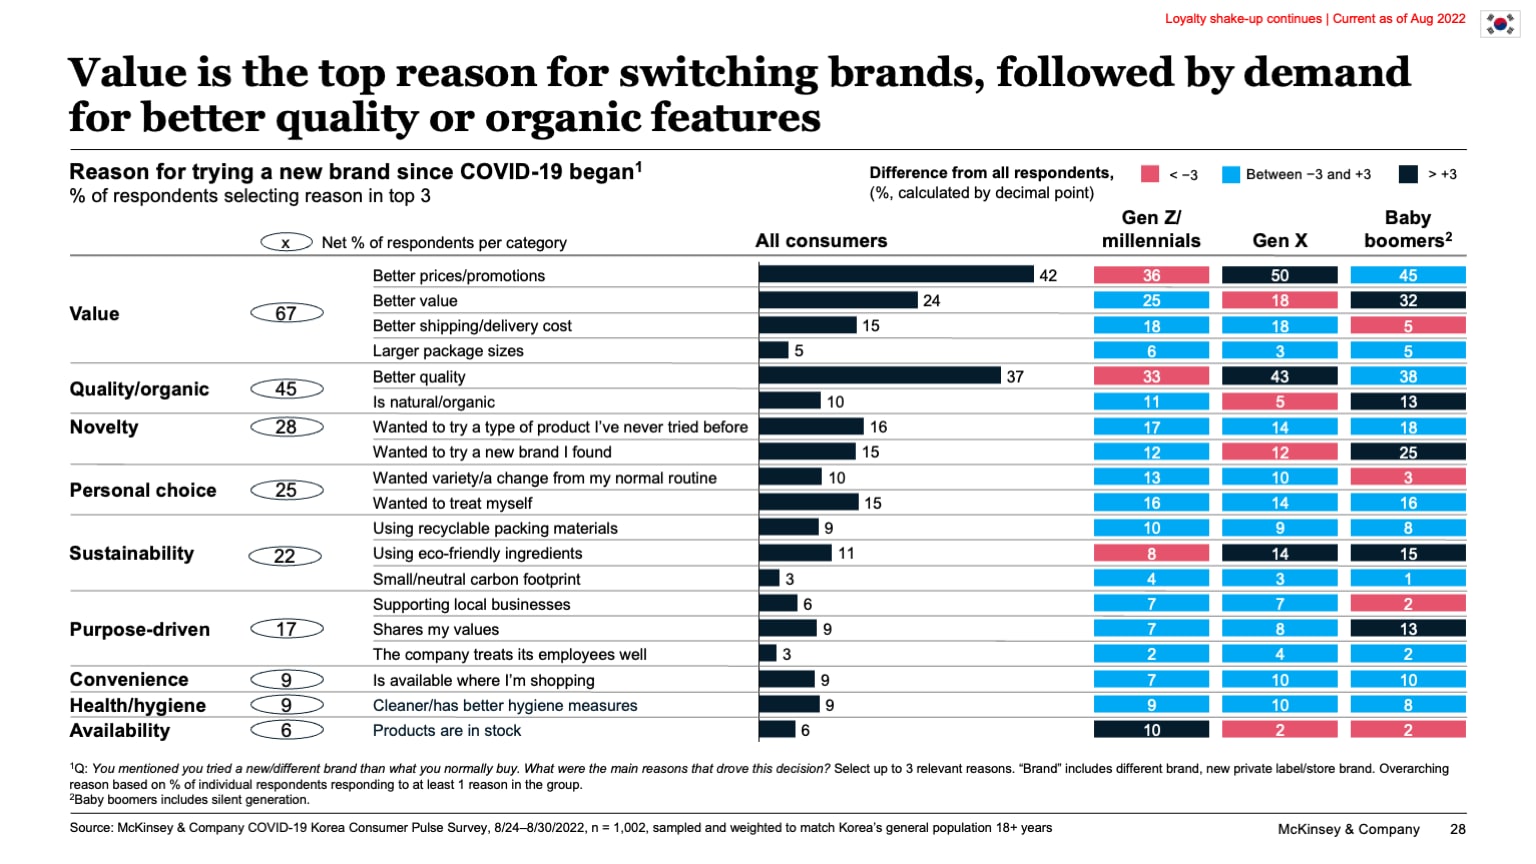 Value is the top reason for switching brands, followed by demand for better quality or organic features